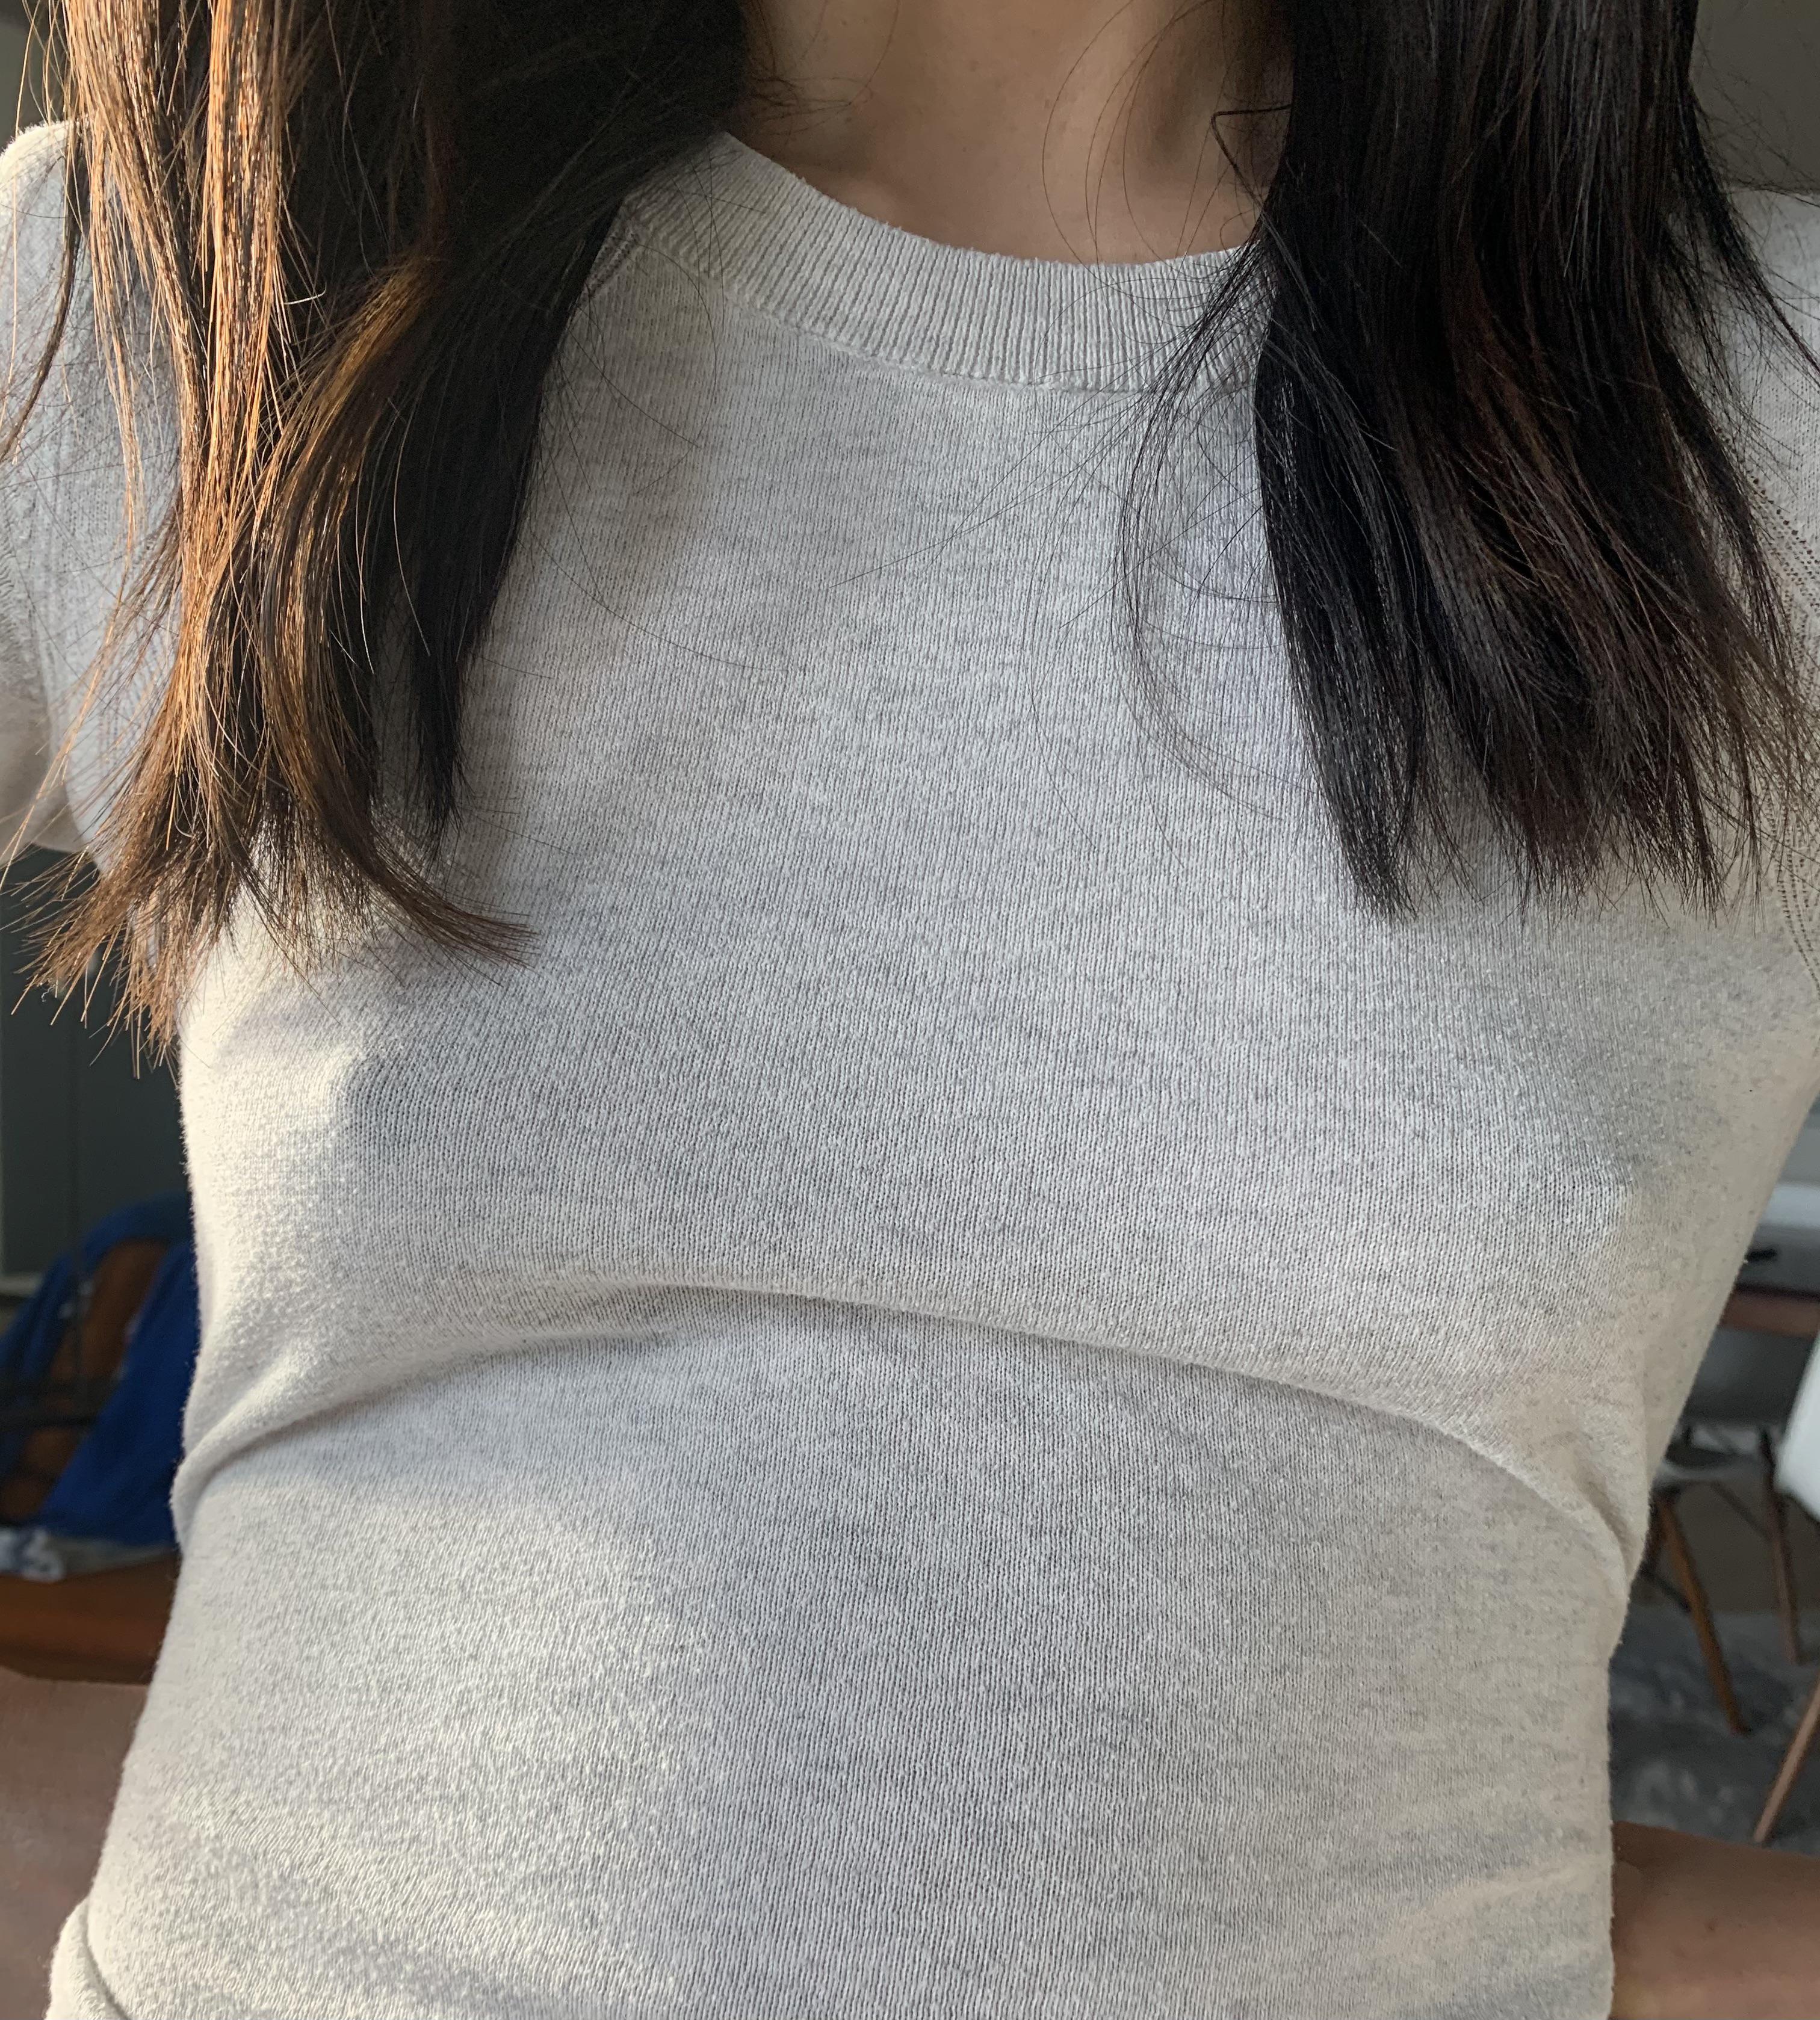 Anyone going to notice my braless Thai tities today?